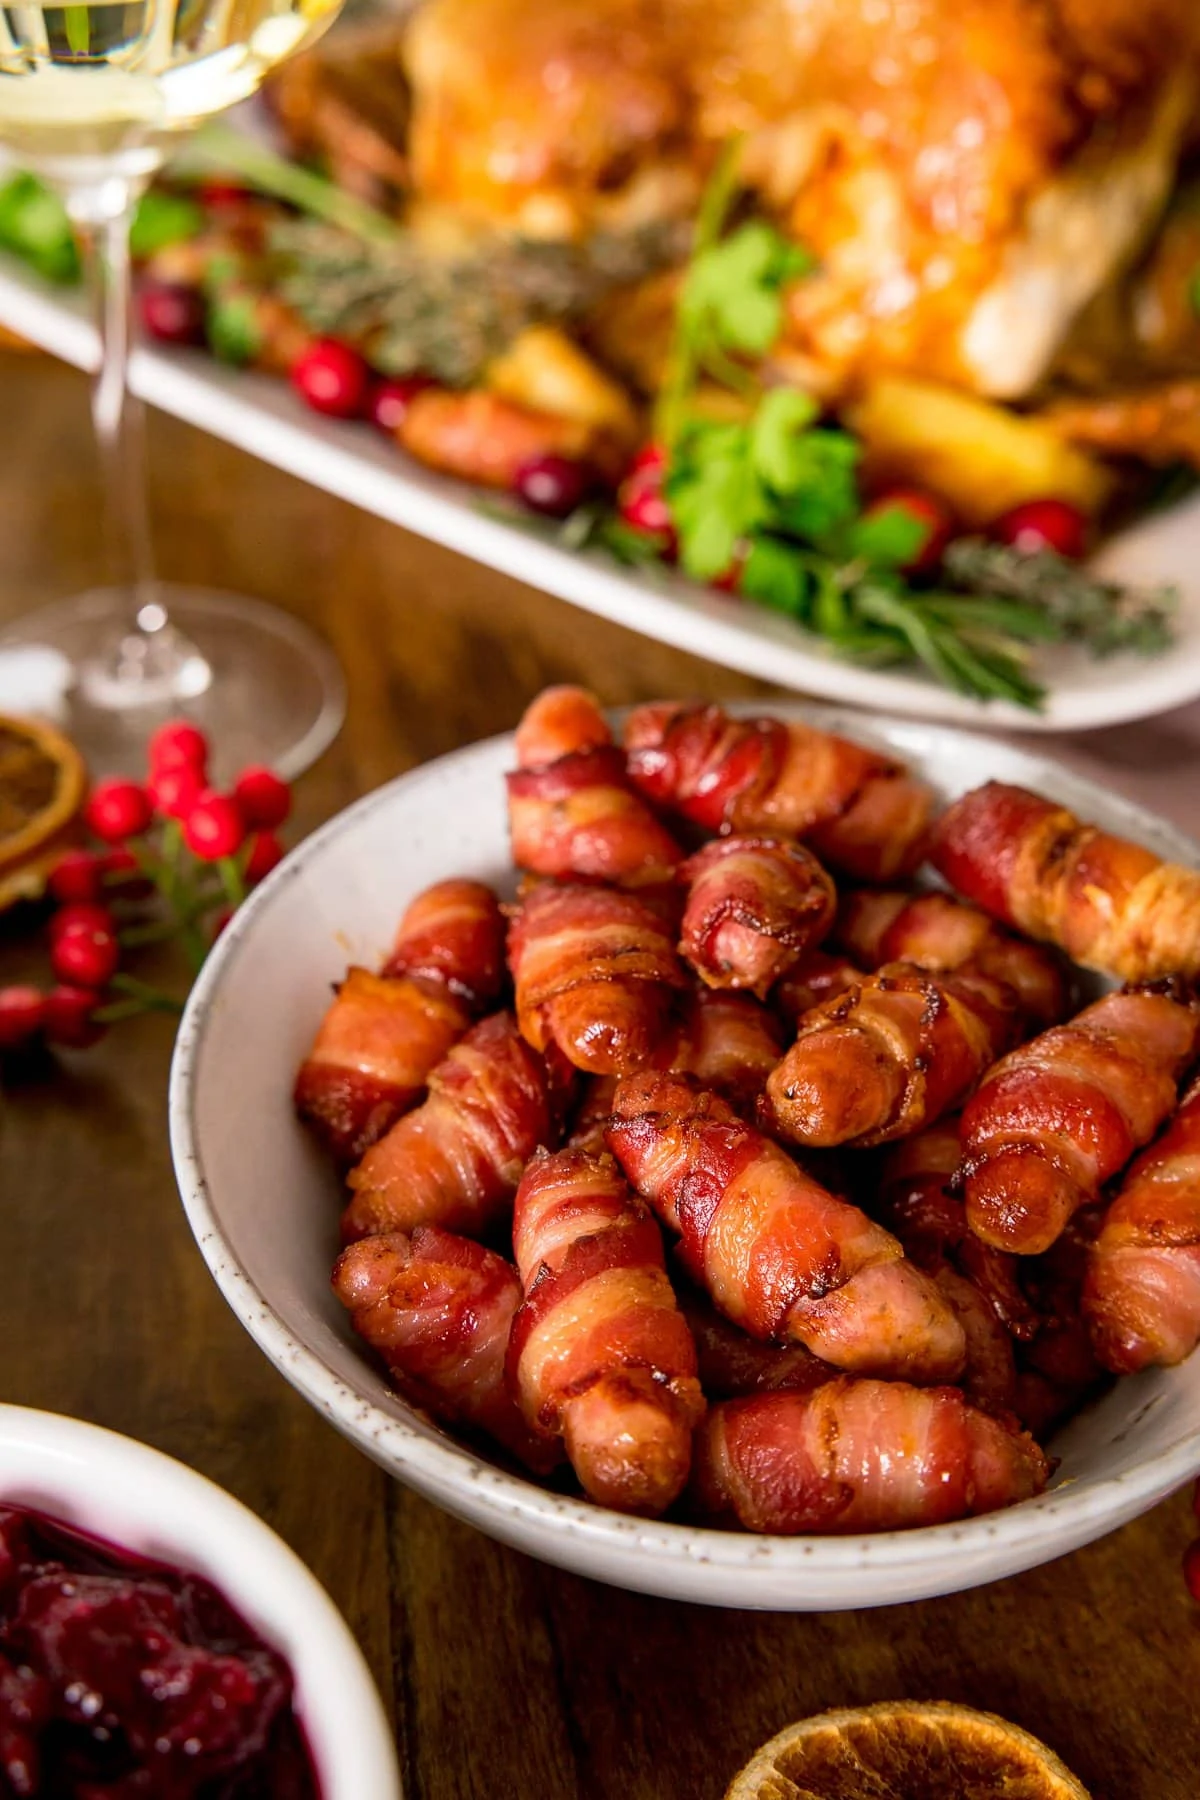 Cocktail sausages wrapped in bacon (pigs in blankets) in a white bowl on a table with other Christmas dishes partially in shot